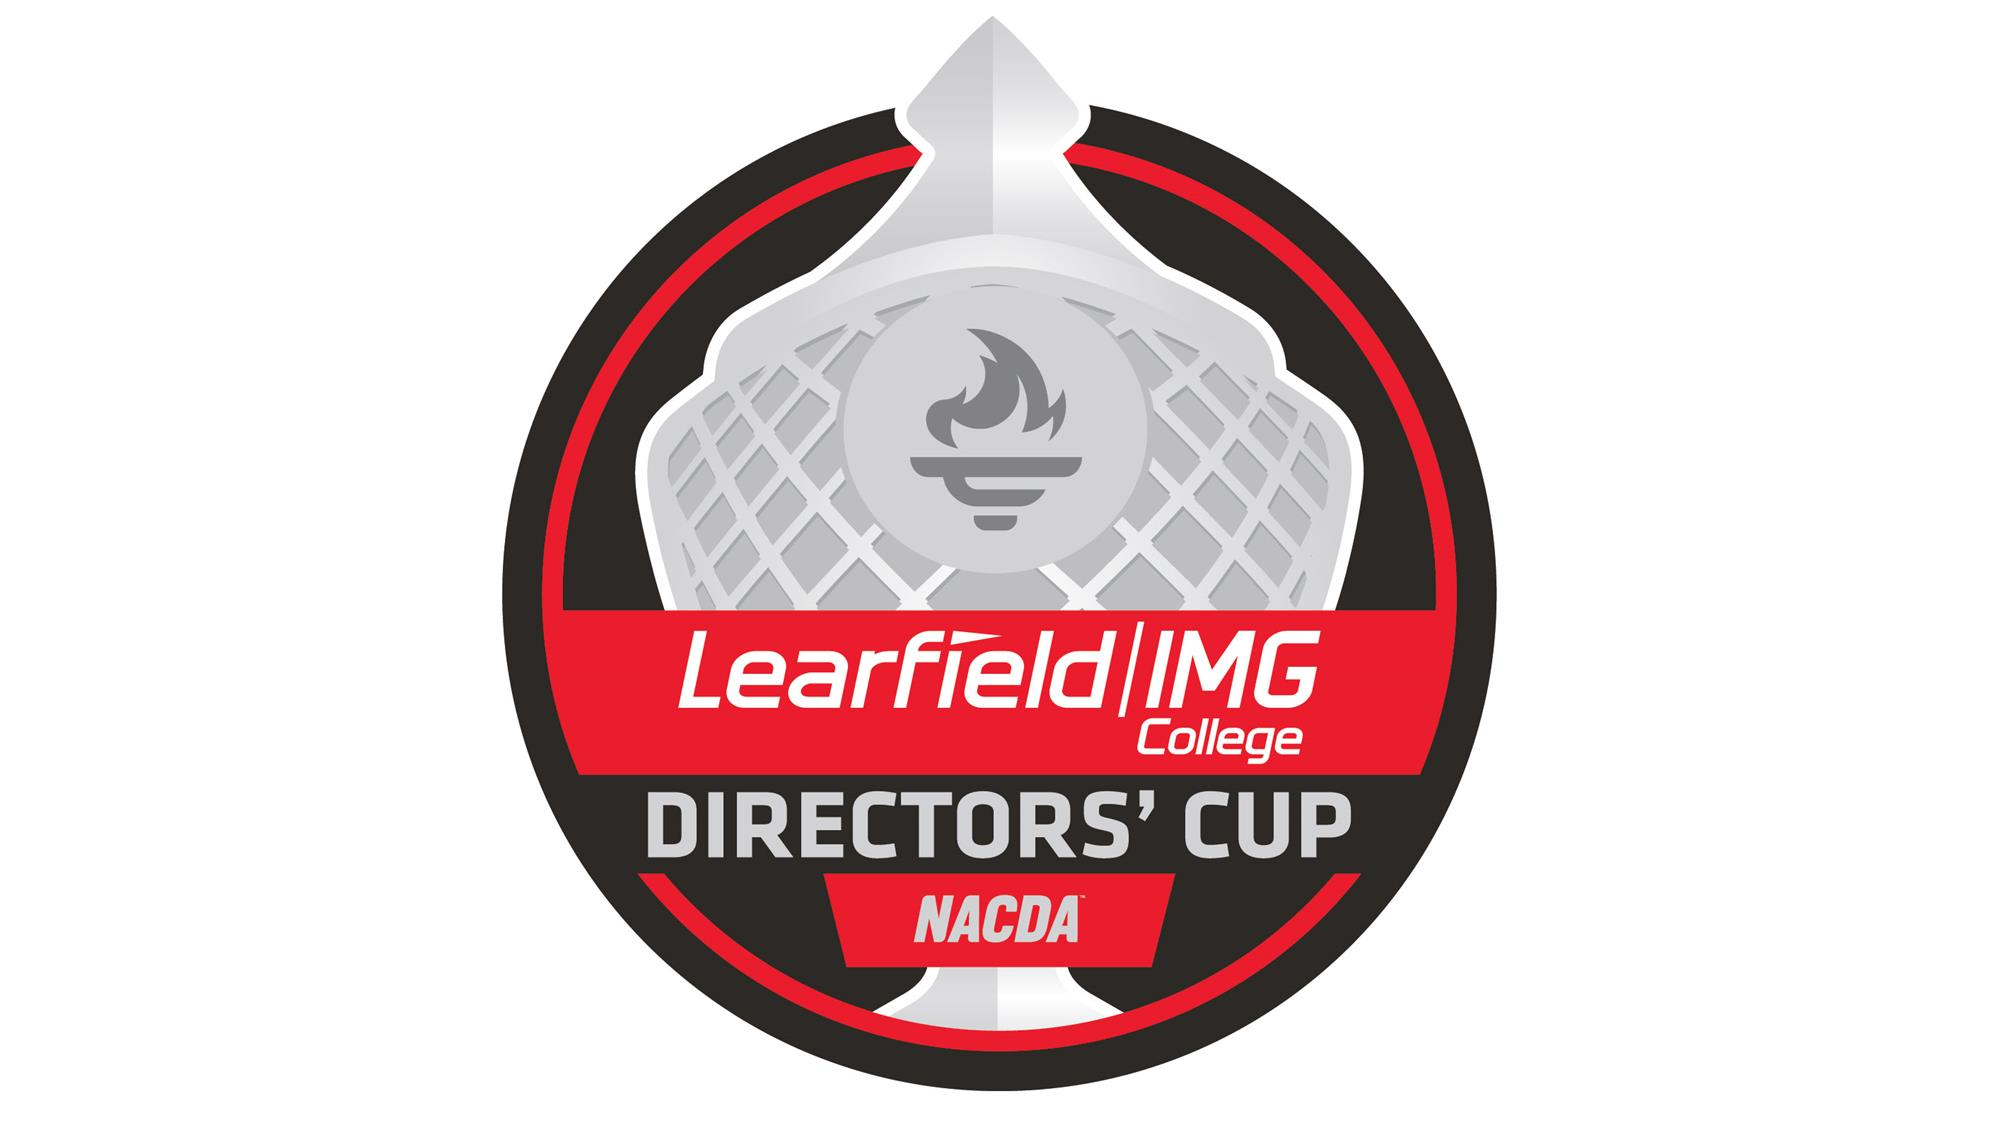 South Carolina earns Top 25 finish in the 2018-19 Learfield IMG Directors’ Cup Standings